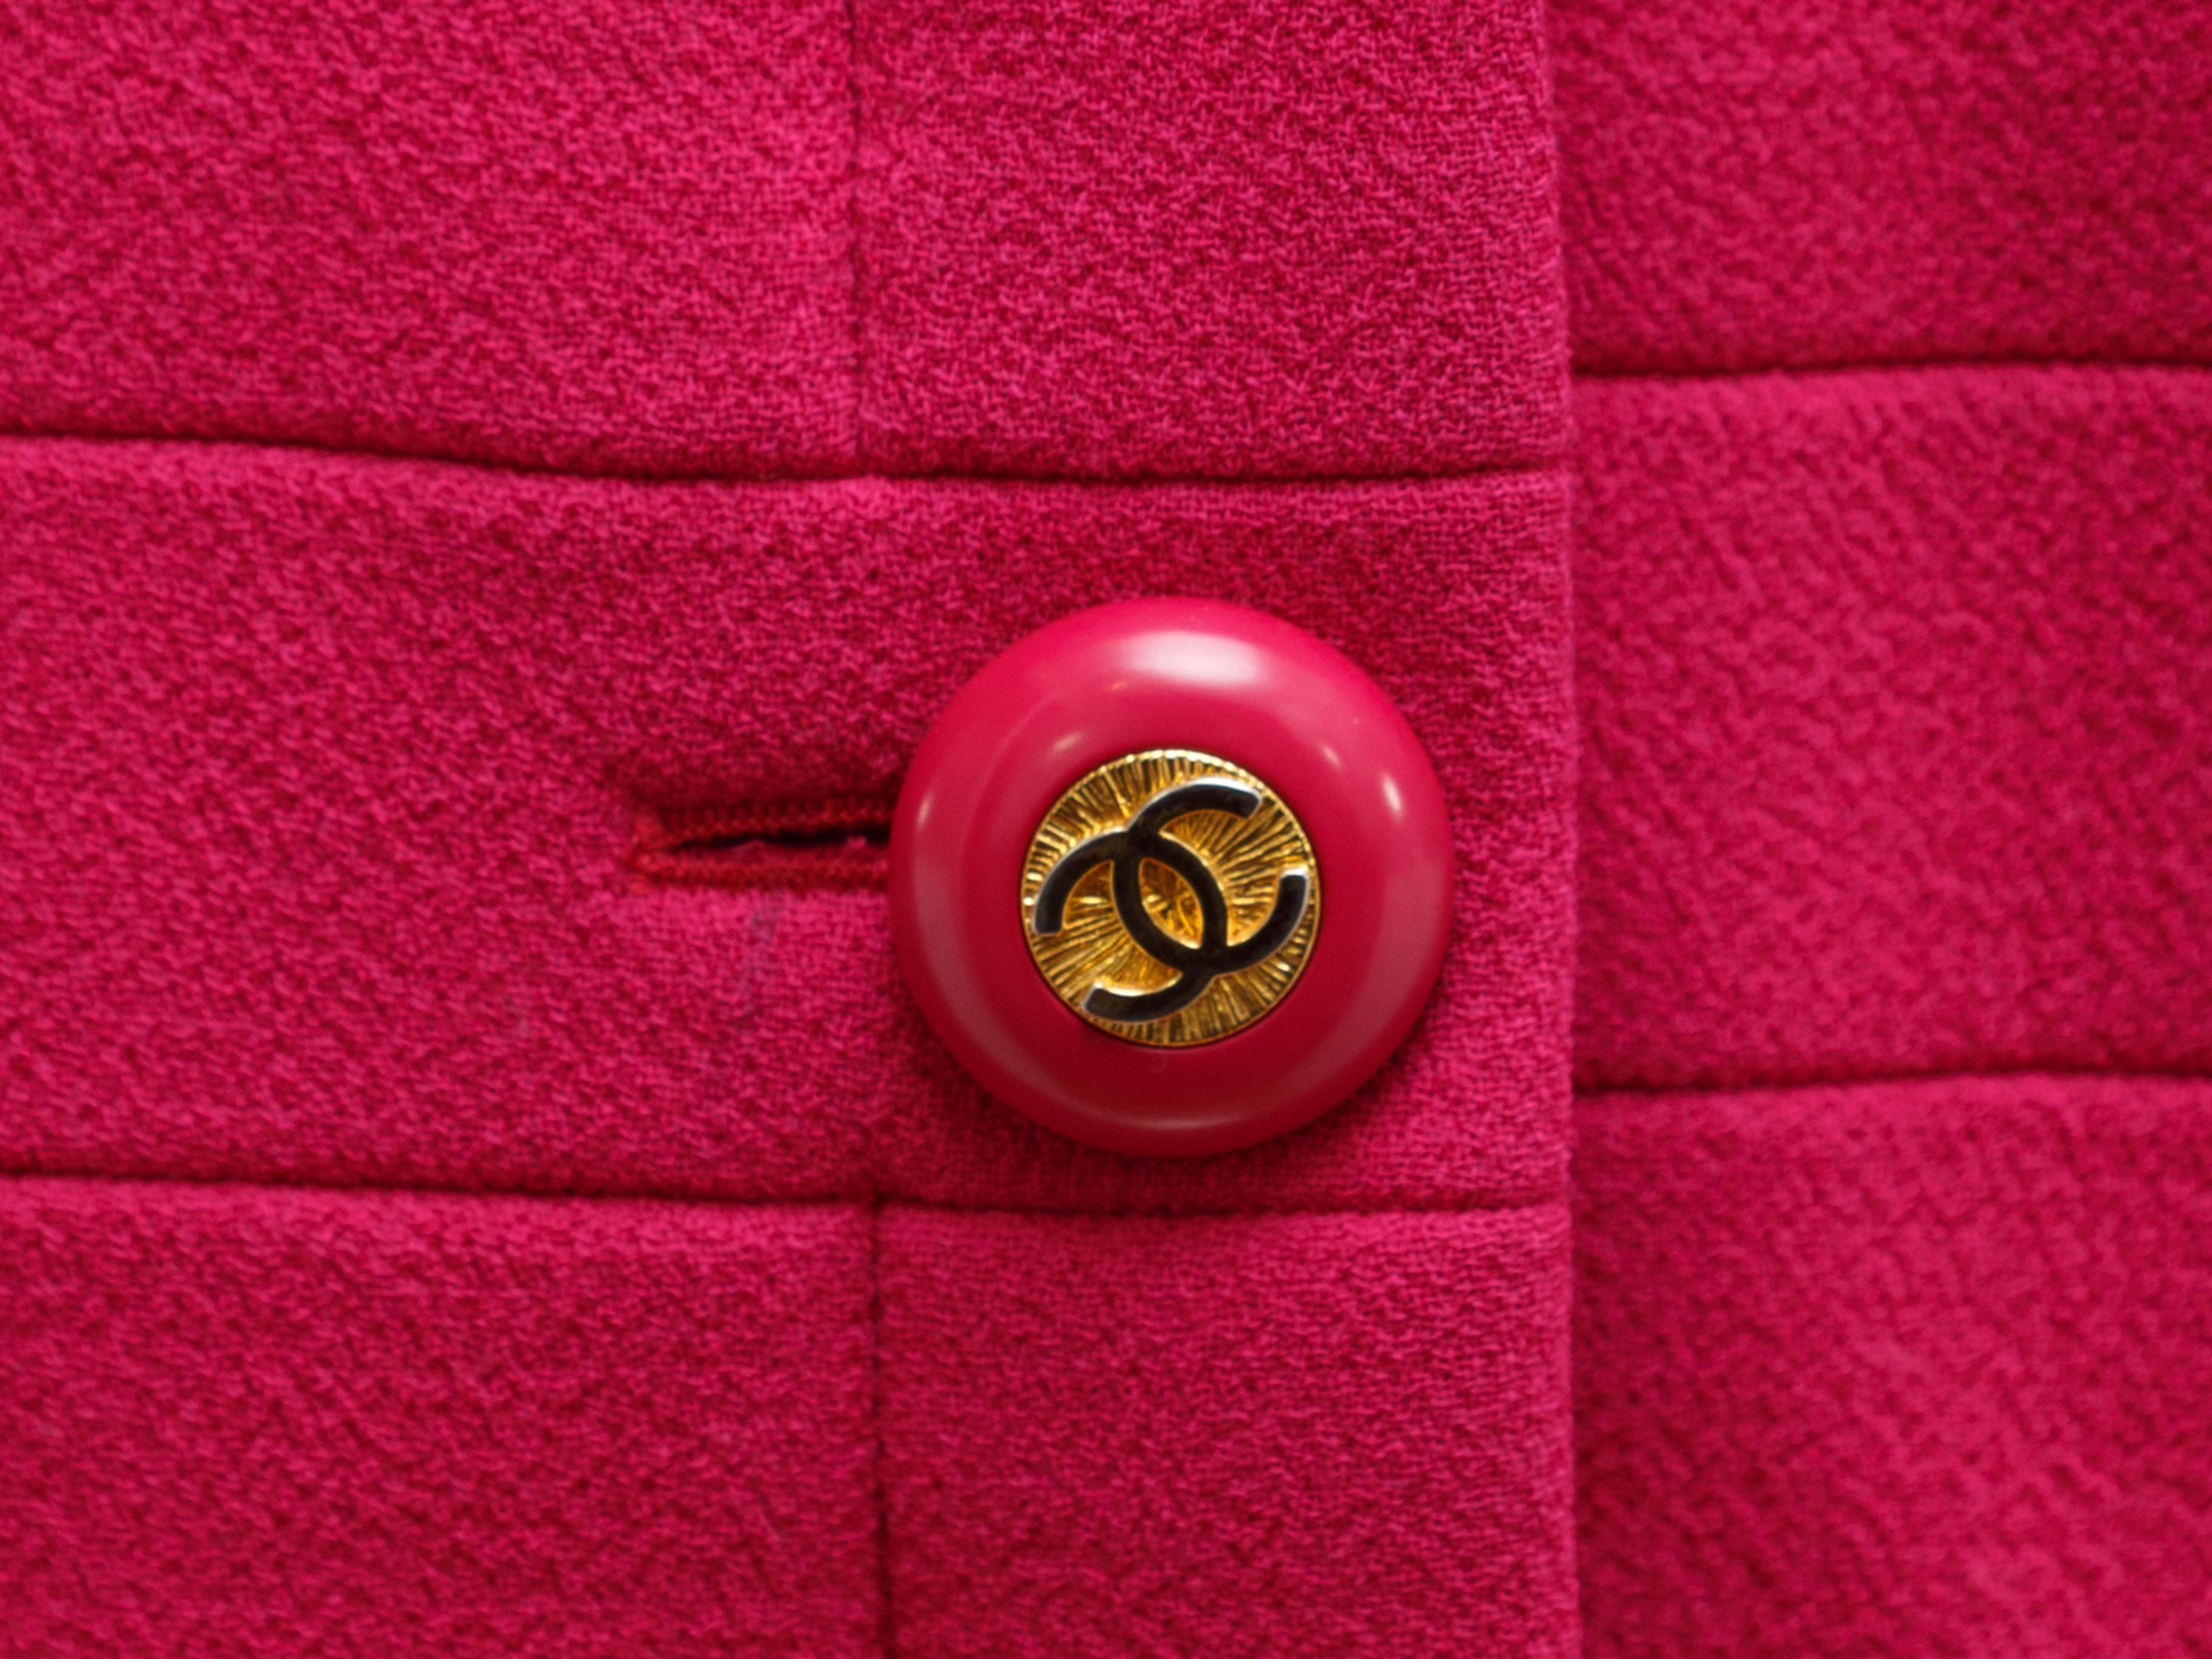 Product details: Vintage bright pink coat by Chanel Boutique. Crew neck. Long sleeves. Dual pockets. Gold-tone CC button closures at center front. Designer size 42. 36